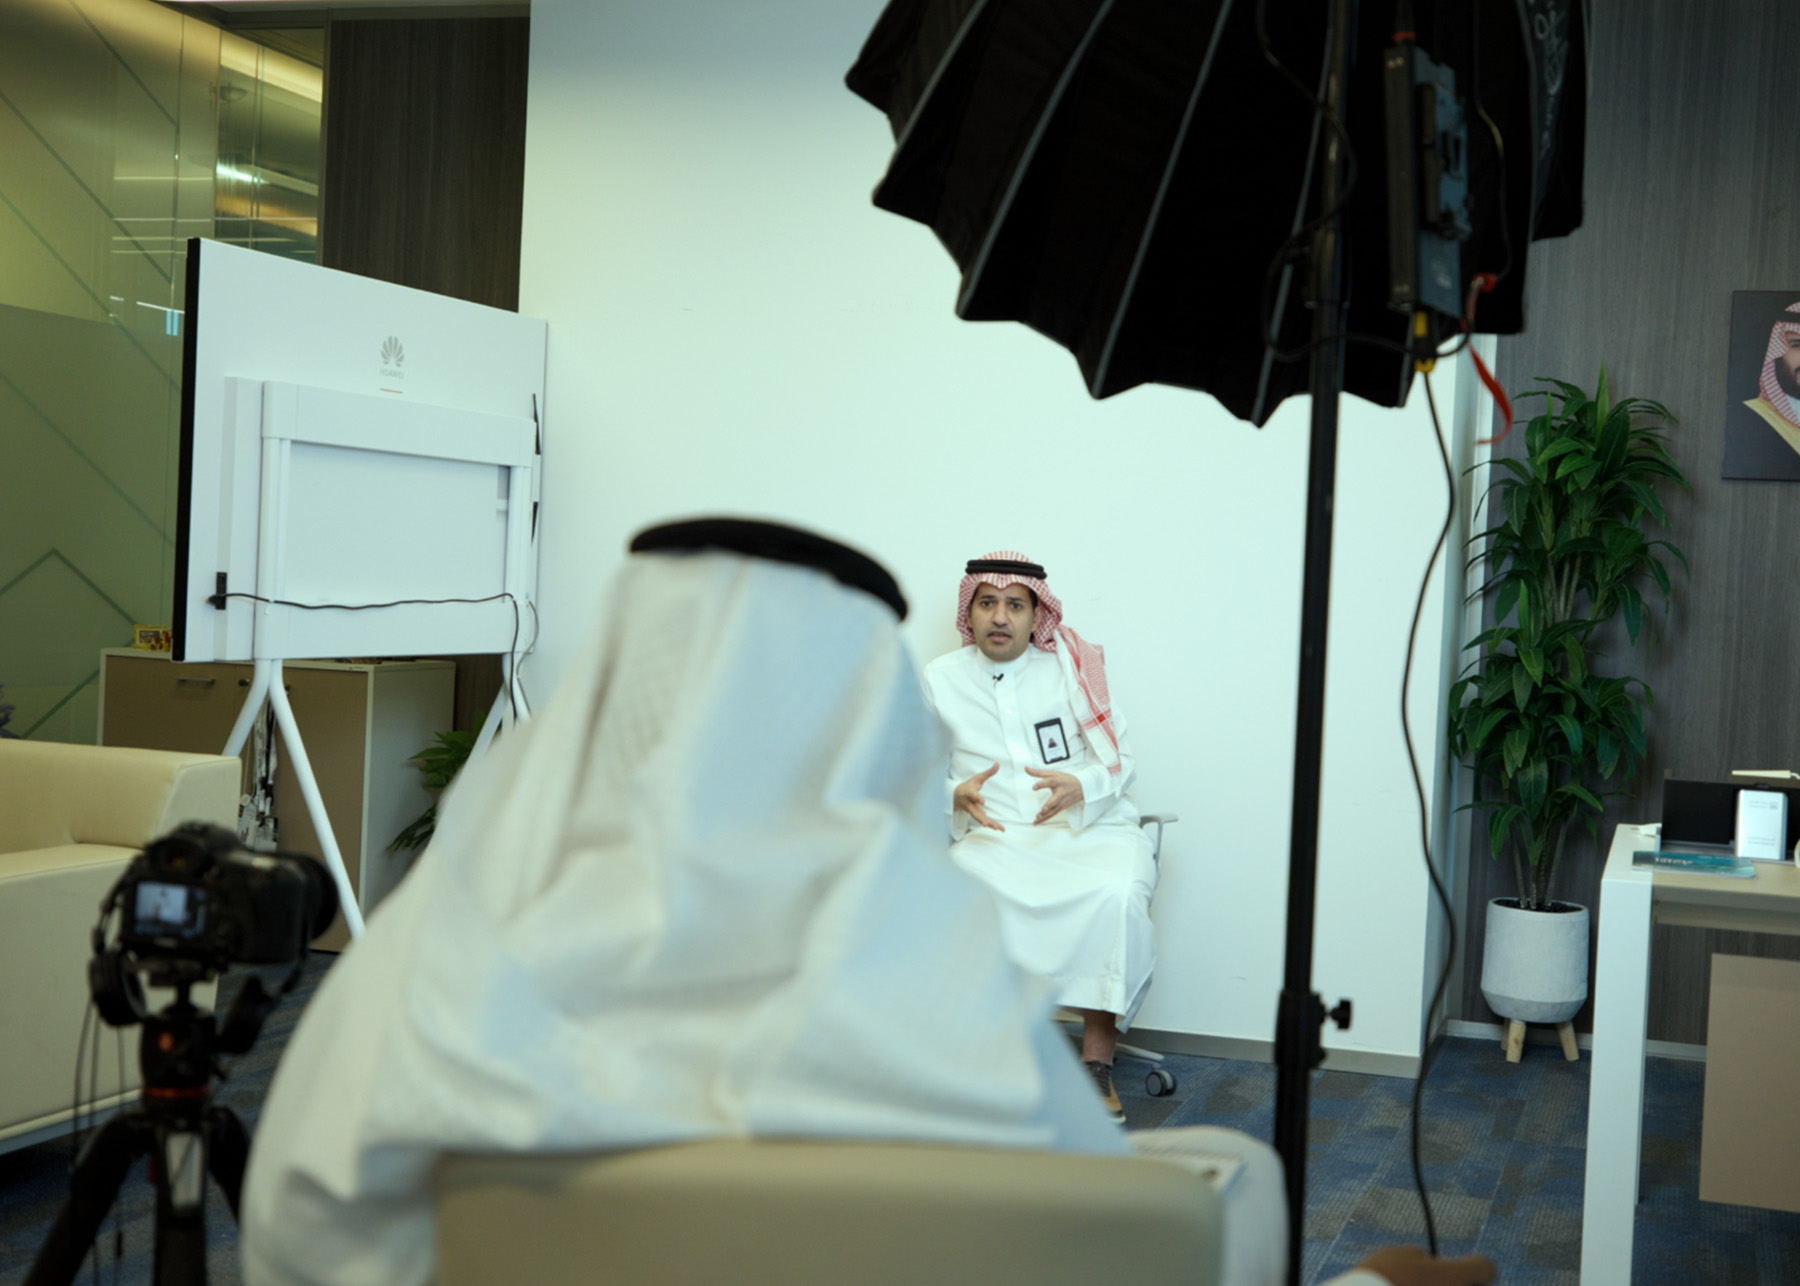 Behind-the-scenes photo of an interview with a Saudi man